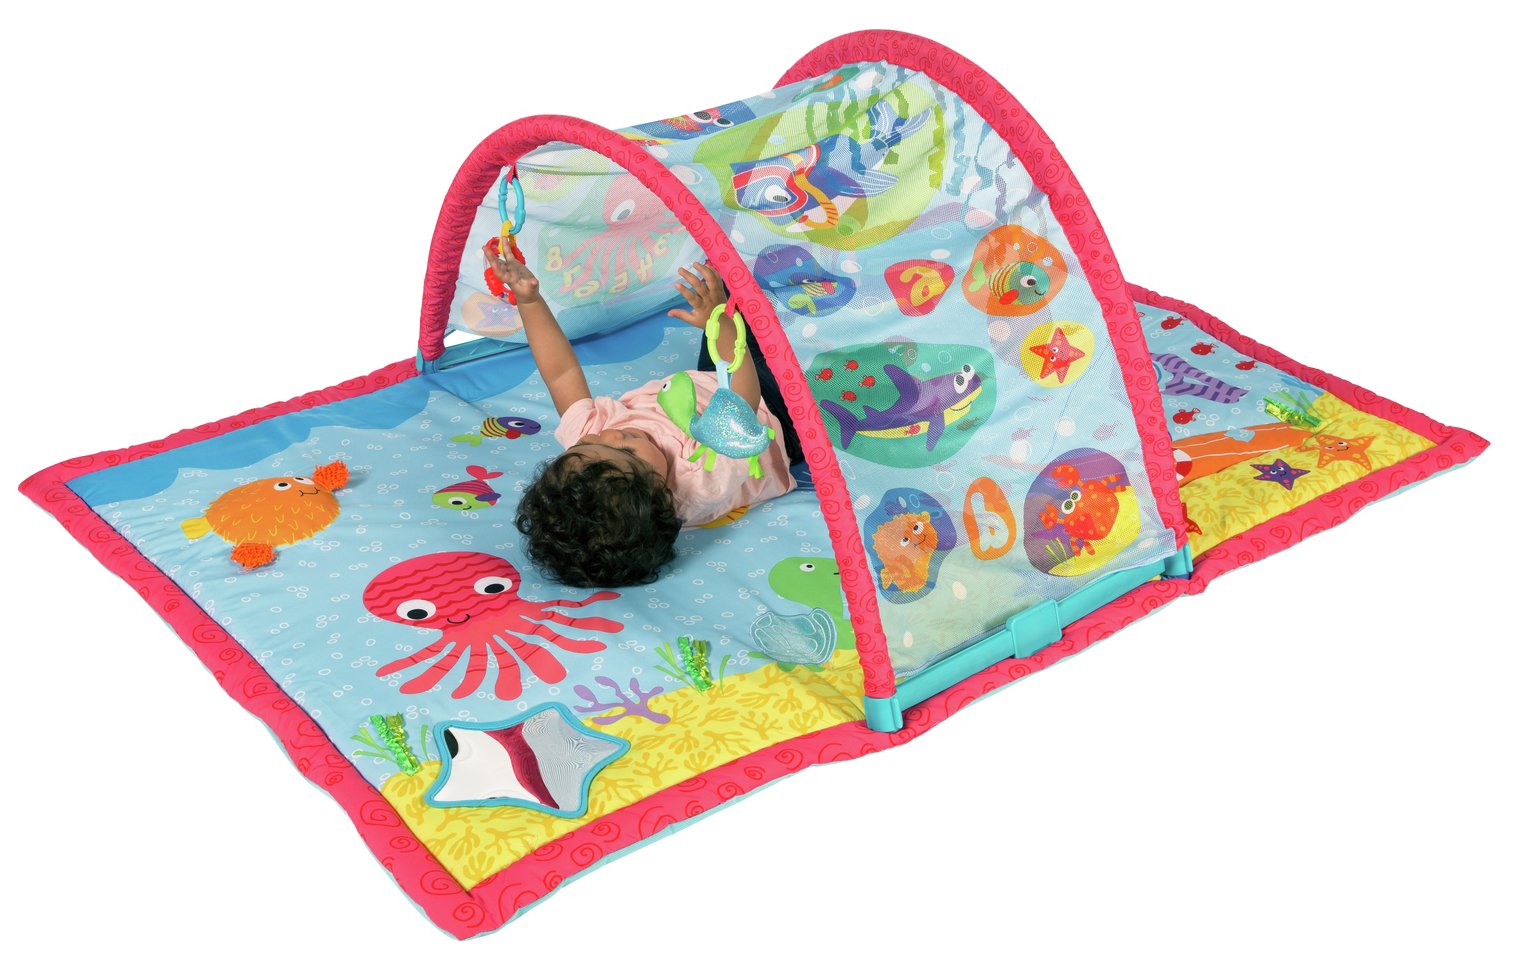 Chad Valley Ocean Deluxe Baby Gym review